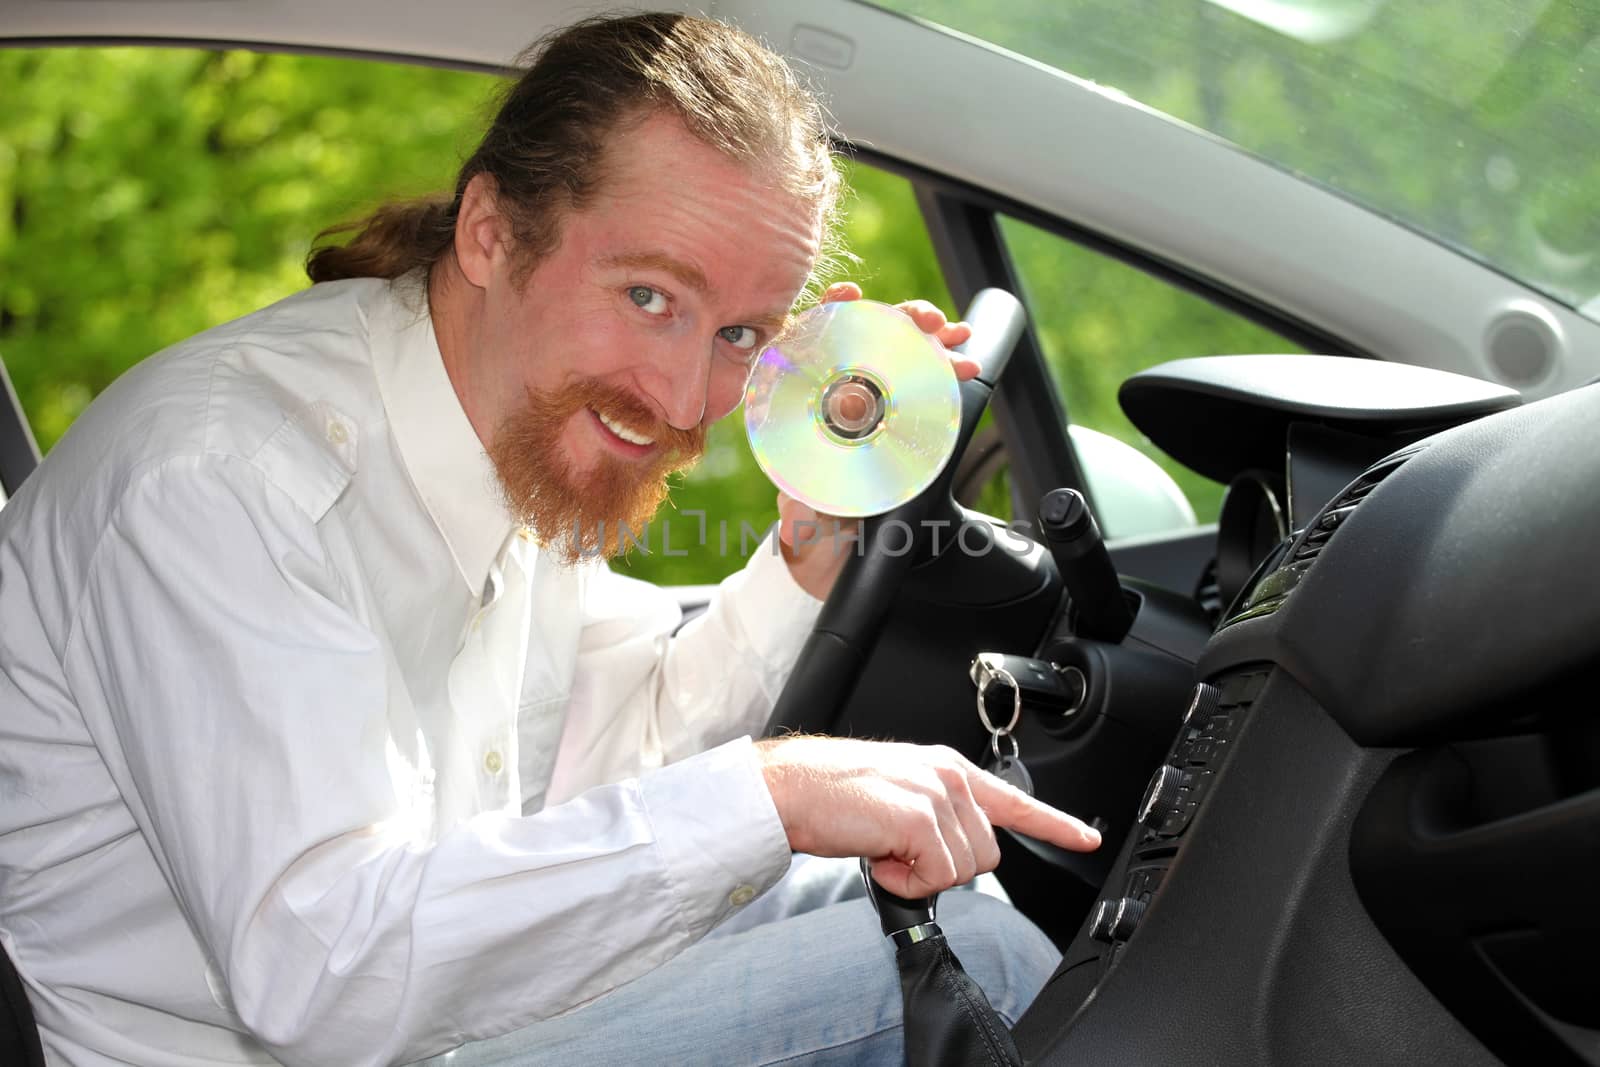 driver with CD, playing music in the car